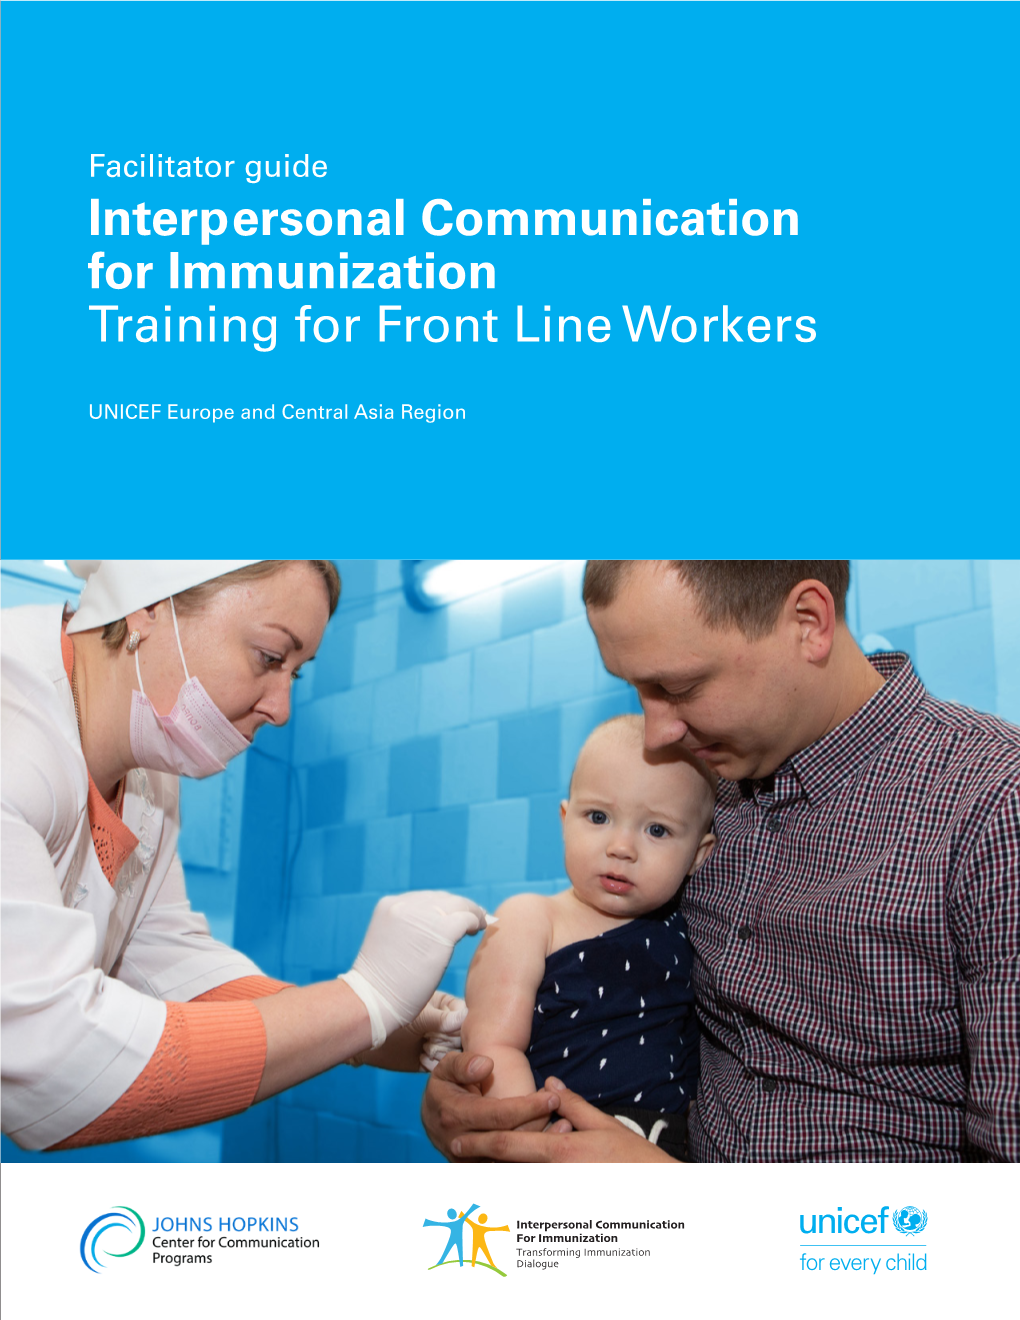 Interpersonal Communication for Immunization Training for Front Line Workers